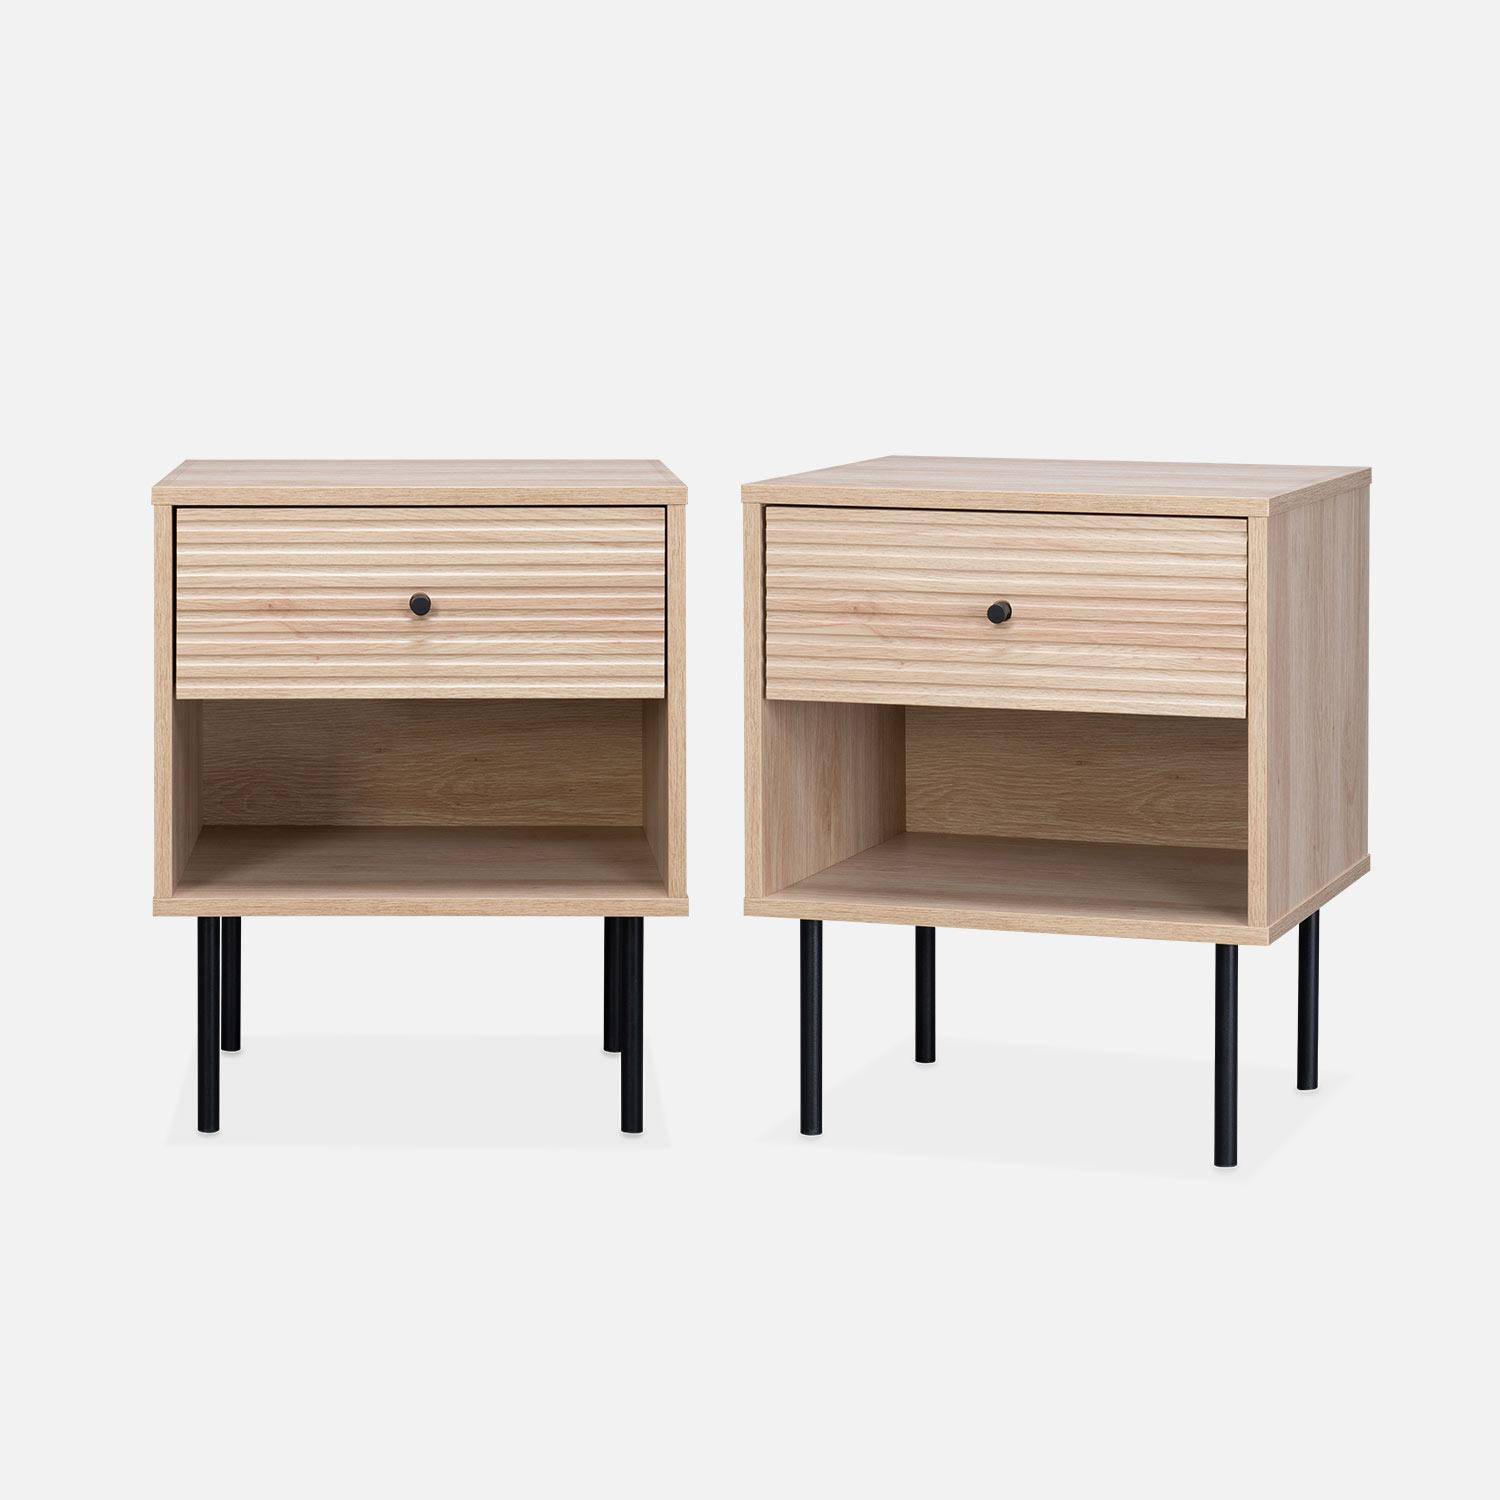 Set of 2 grooved wood effect bedside table, natural, L45xW39.5xH55.5cm Photo3